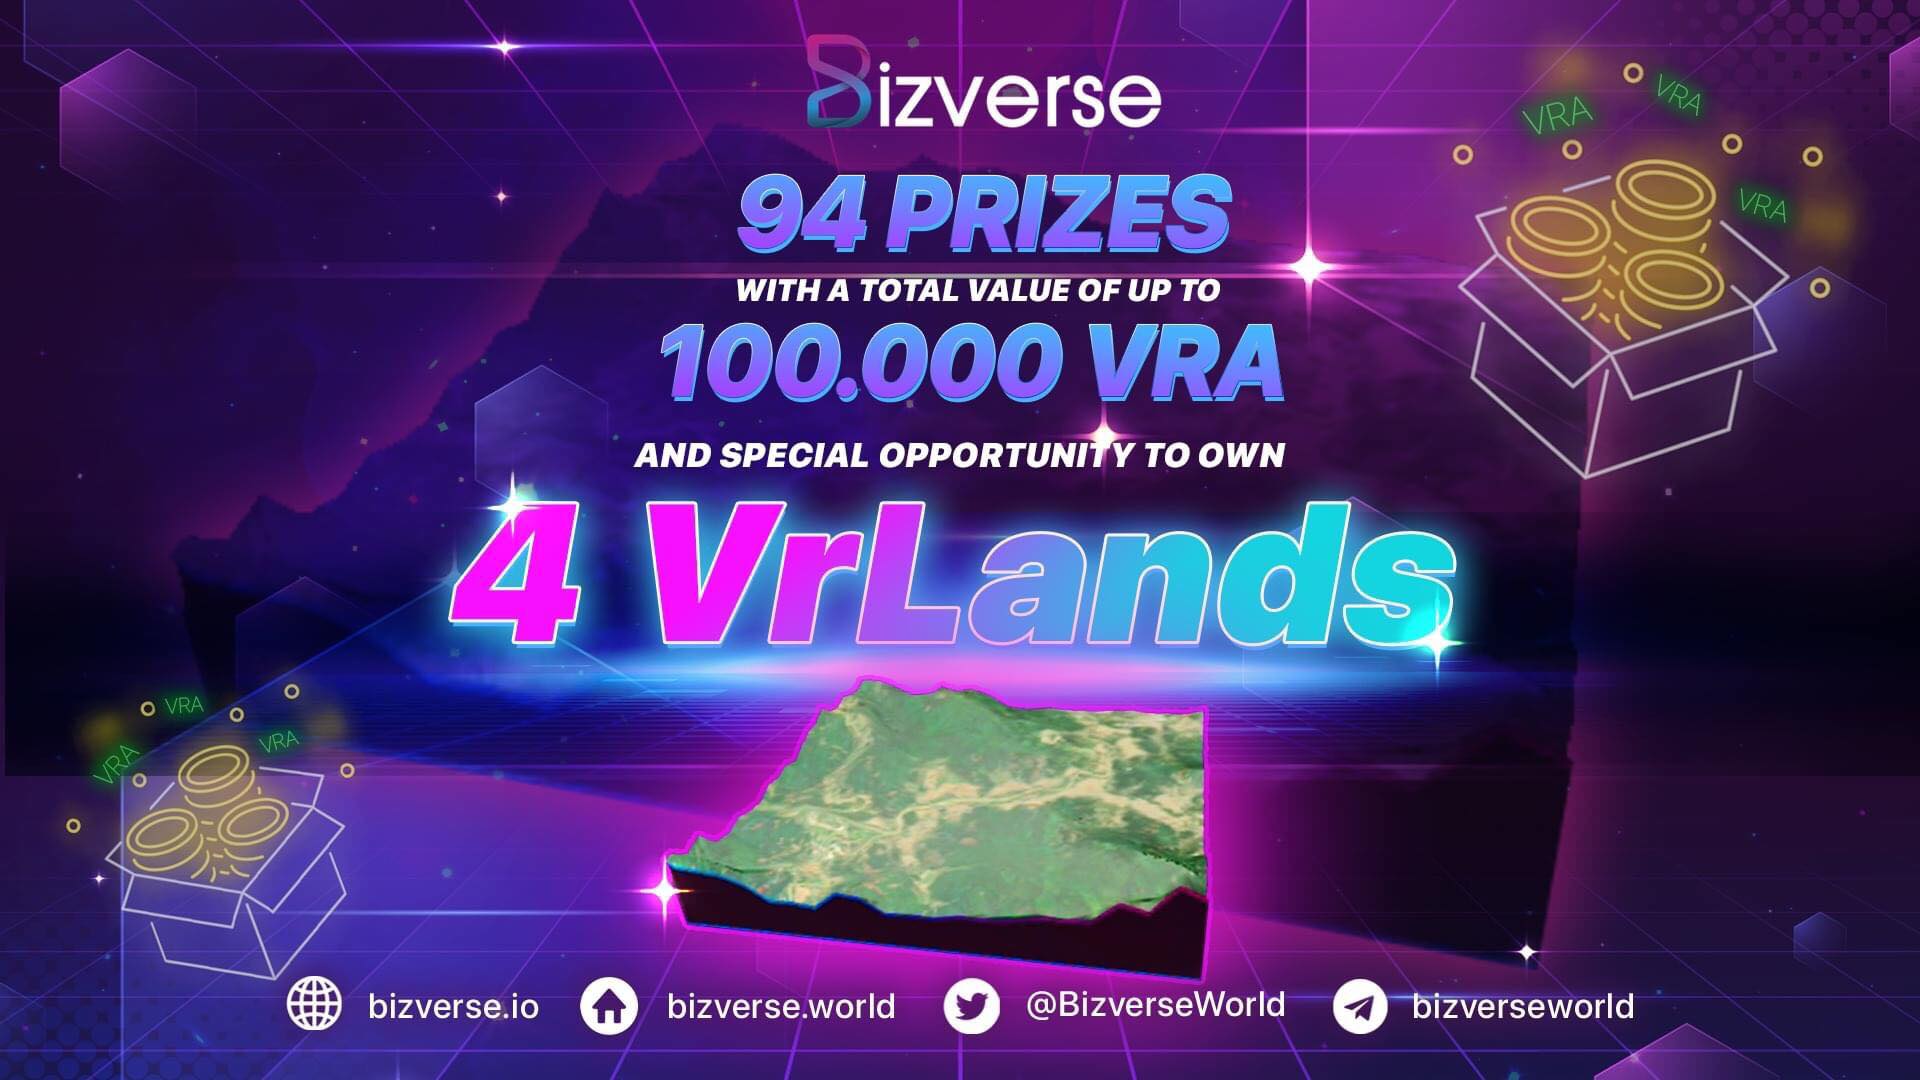 ONLY OPPORTUNITY TO GET "FREE" VRLANDS